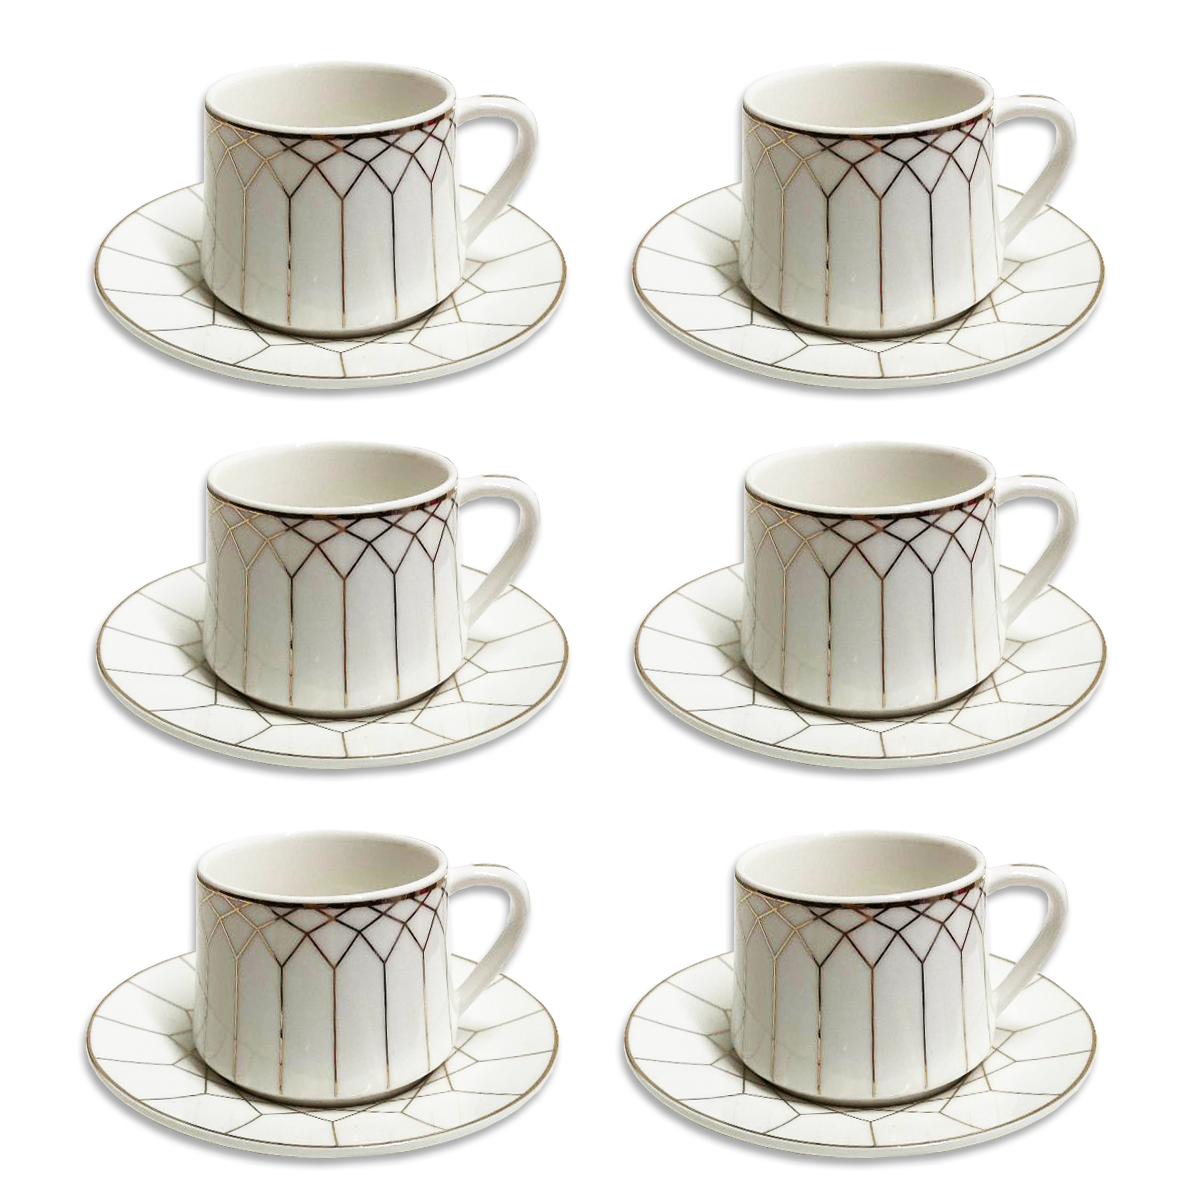 Turkish Coffee Serving Sets-4 Coffee PorcelainCup&Saucer,Coffee Maker  Pot,Coffee